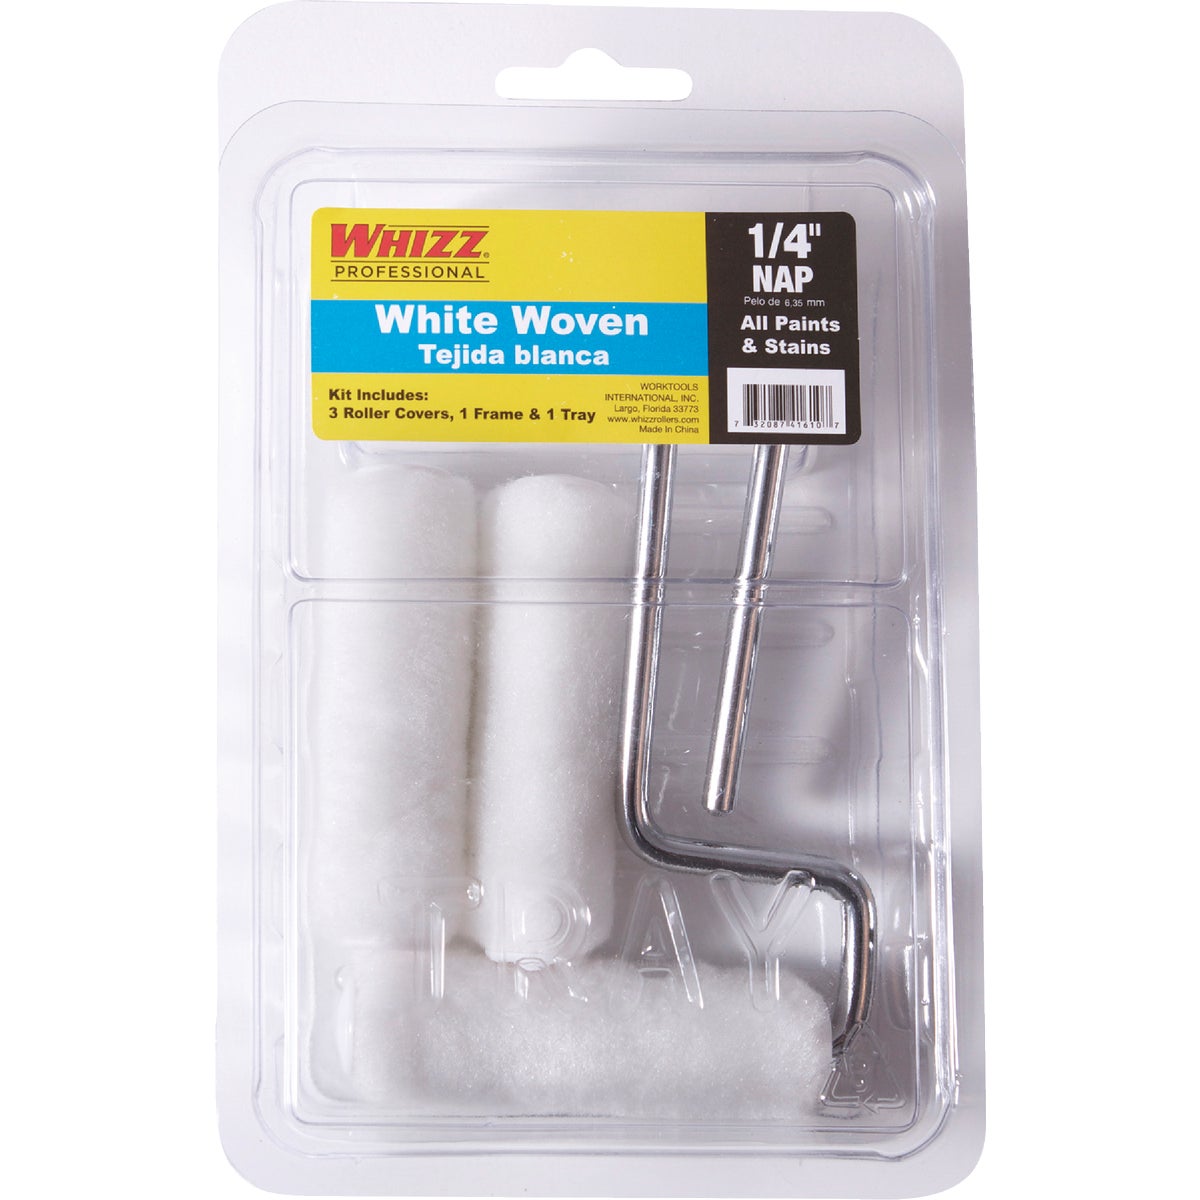 Whizz 3 In. x 1/4 In. Woven Trim Roller Kit